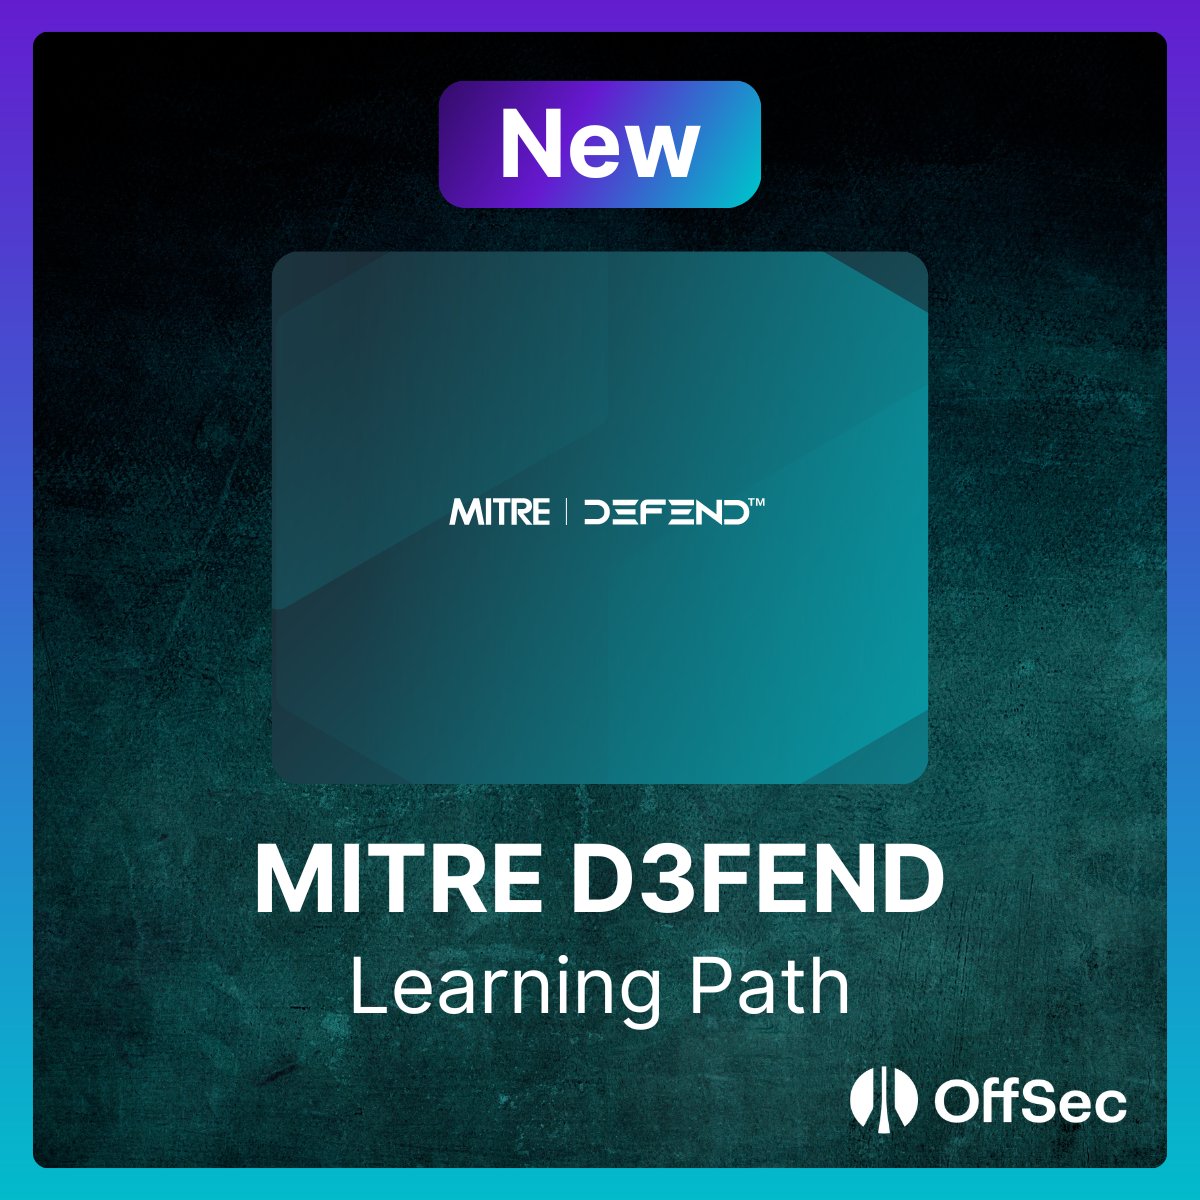 Introducing a new Learning Path - MITRE D3FEND: offs.ec/4ayArhM We're continuing to align our training with industry-standard frameworks like MITRE D3FEND. This Learning Path teaches 3️⃣ tactics: Detect, Harden, and Model.